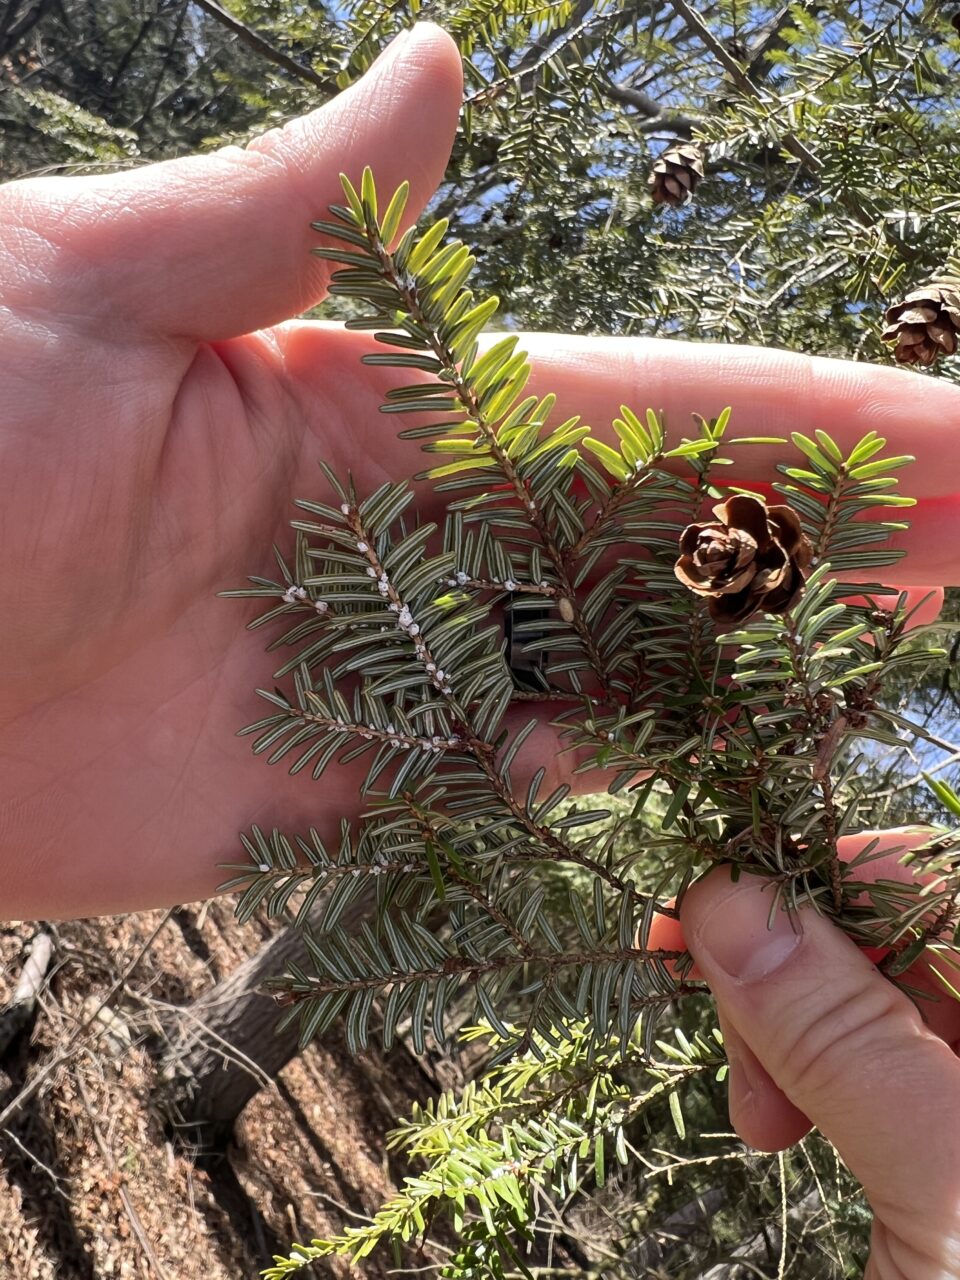 Jim Altemus, a forest health program specialist with Pennsylvania’s Department of Conservation and Natural Resources (DCNR), looks for signs of Hemlock Wolly Adelgid in Bald Eagle State Park.